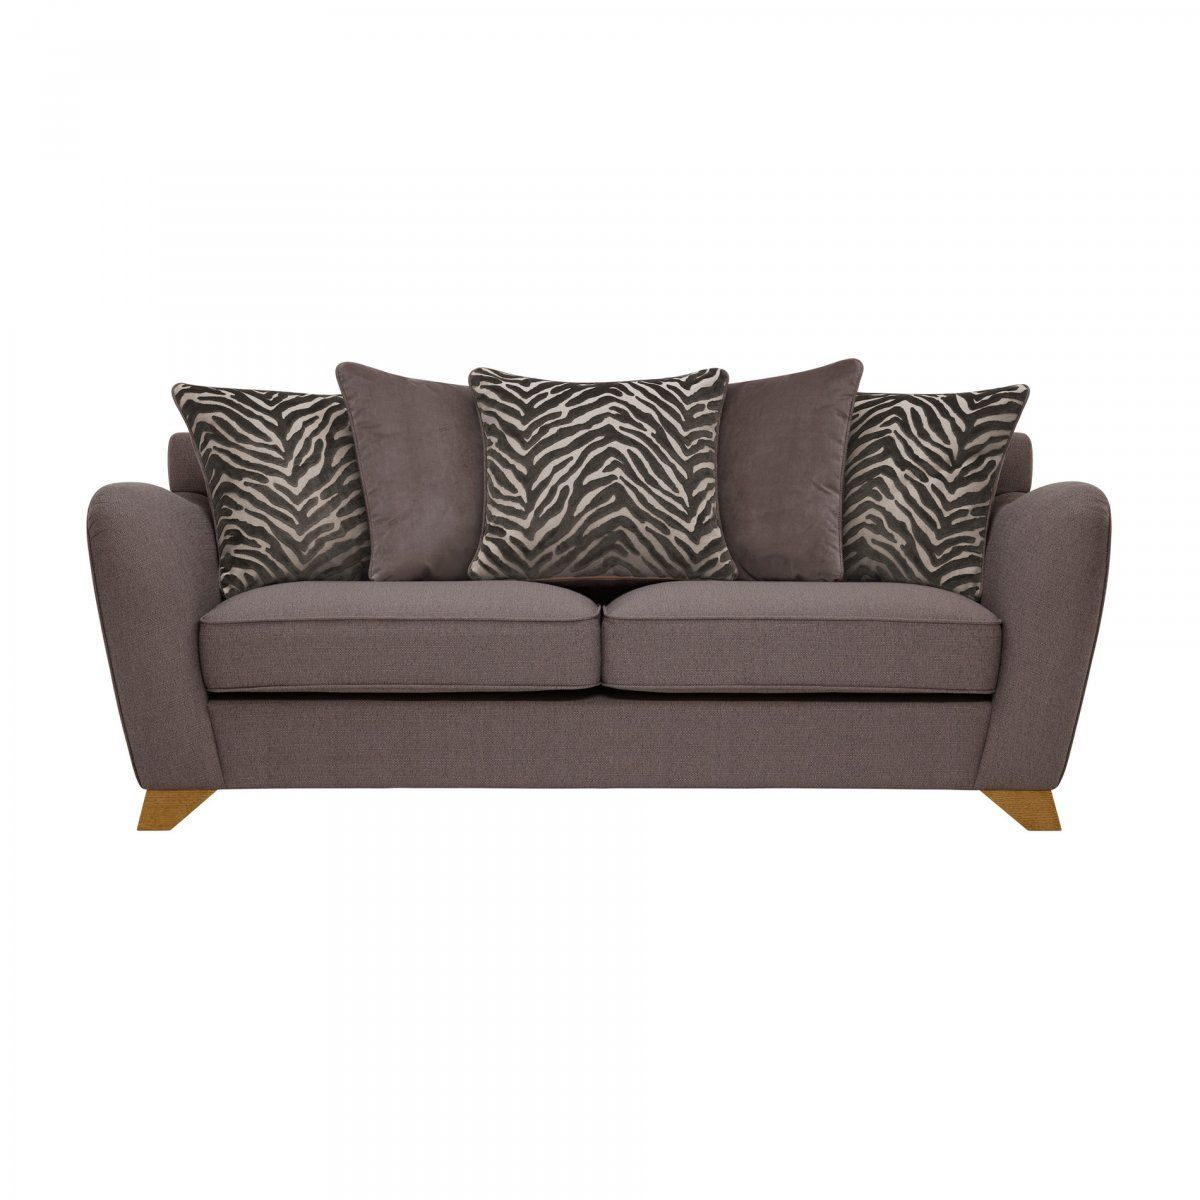 Abbey Traditional Pillow Back 3 Seater Fabric Sofa Regarding Traditional 3 Seater Sofas (Gallery 15 of 20)